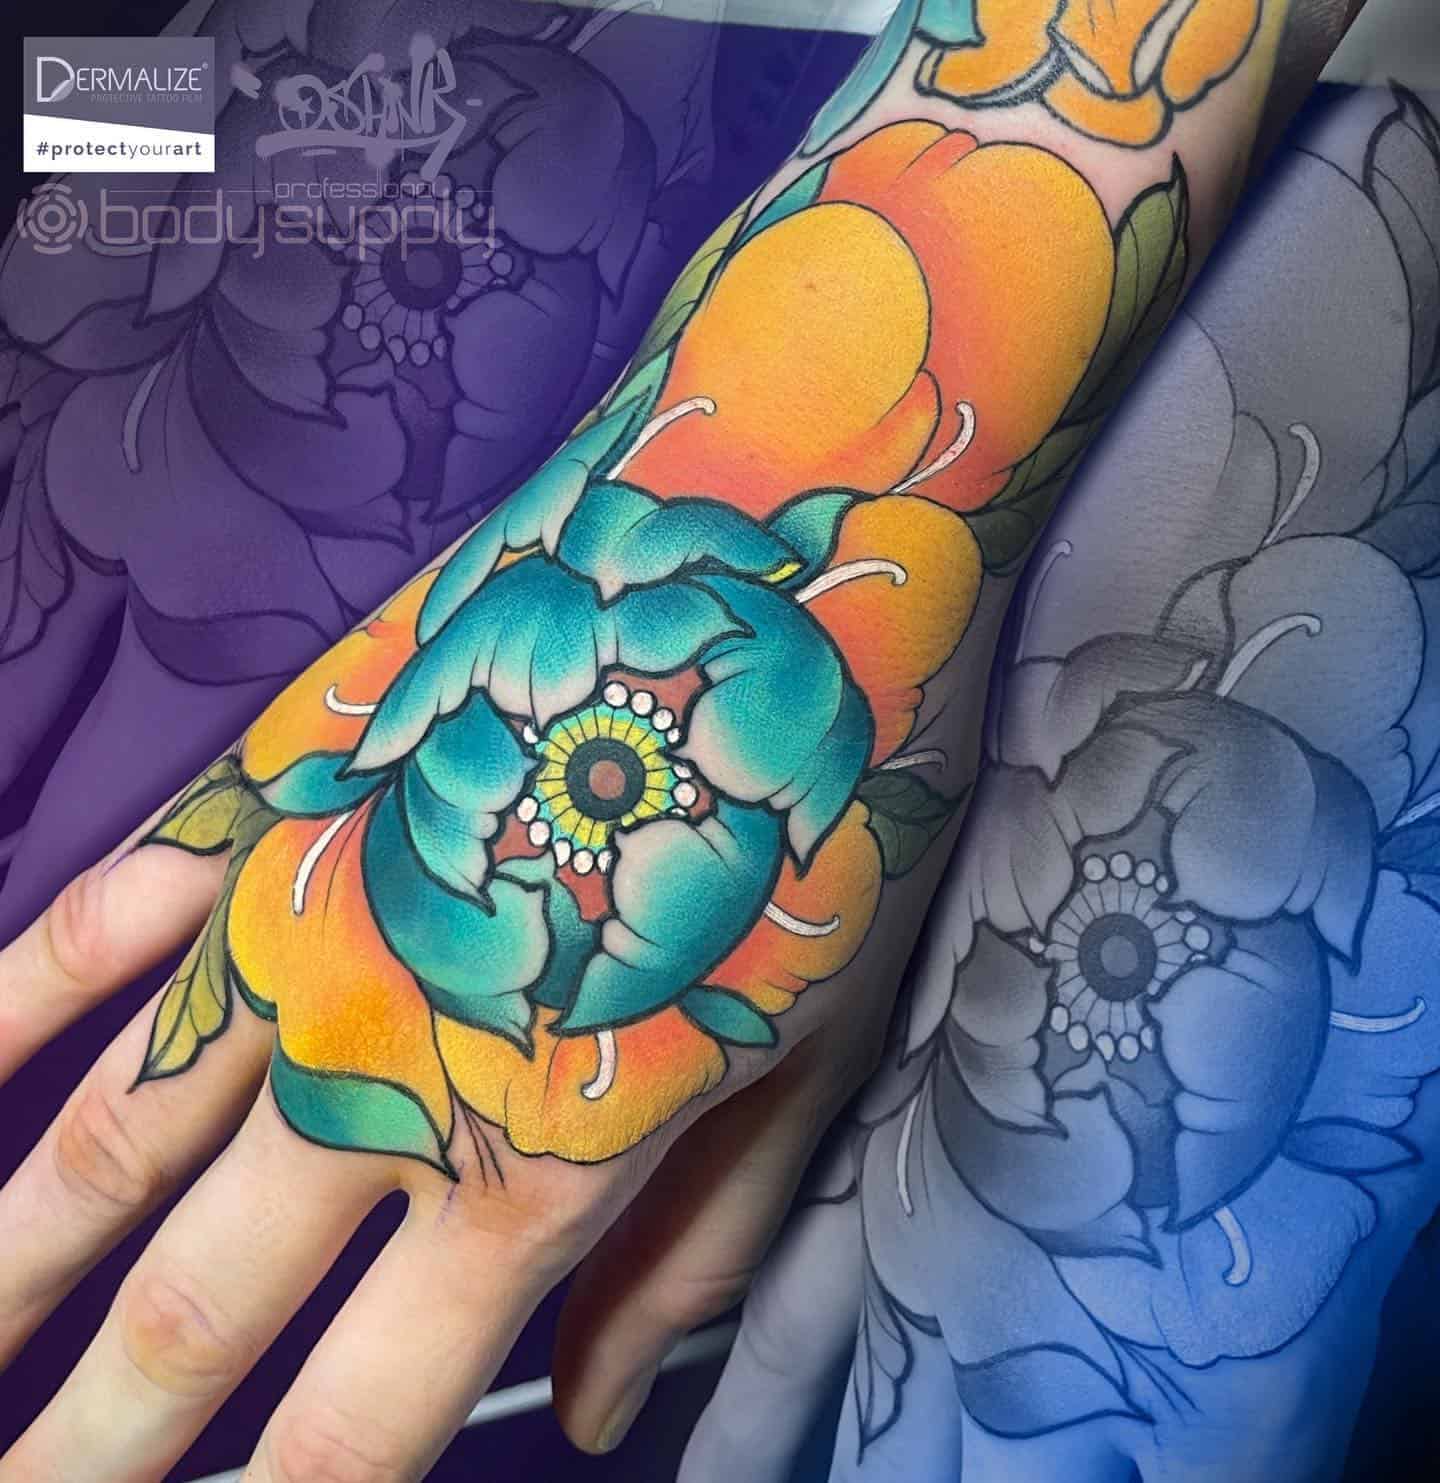 Best Hand and Finger Tattoos Top 10 Hand and Finger Tattoo Ideas   MrInkwells